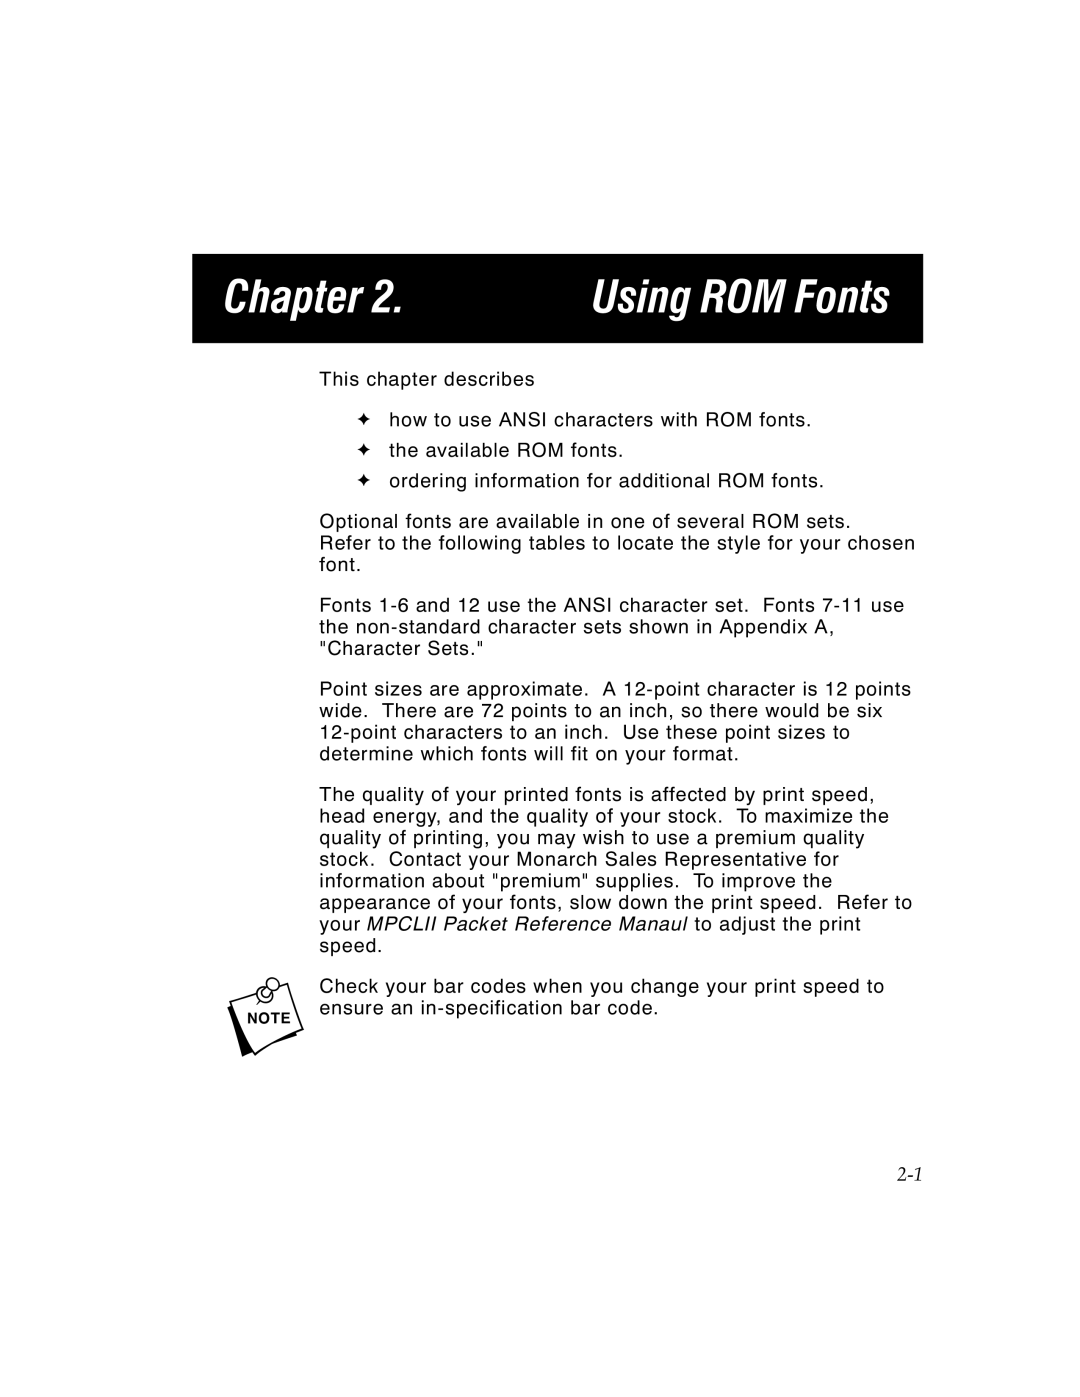 Paxar MPCL II manual Chapter, Using ROM Fonts 